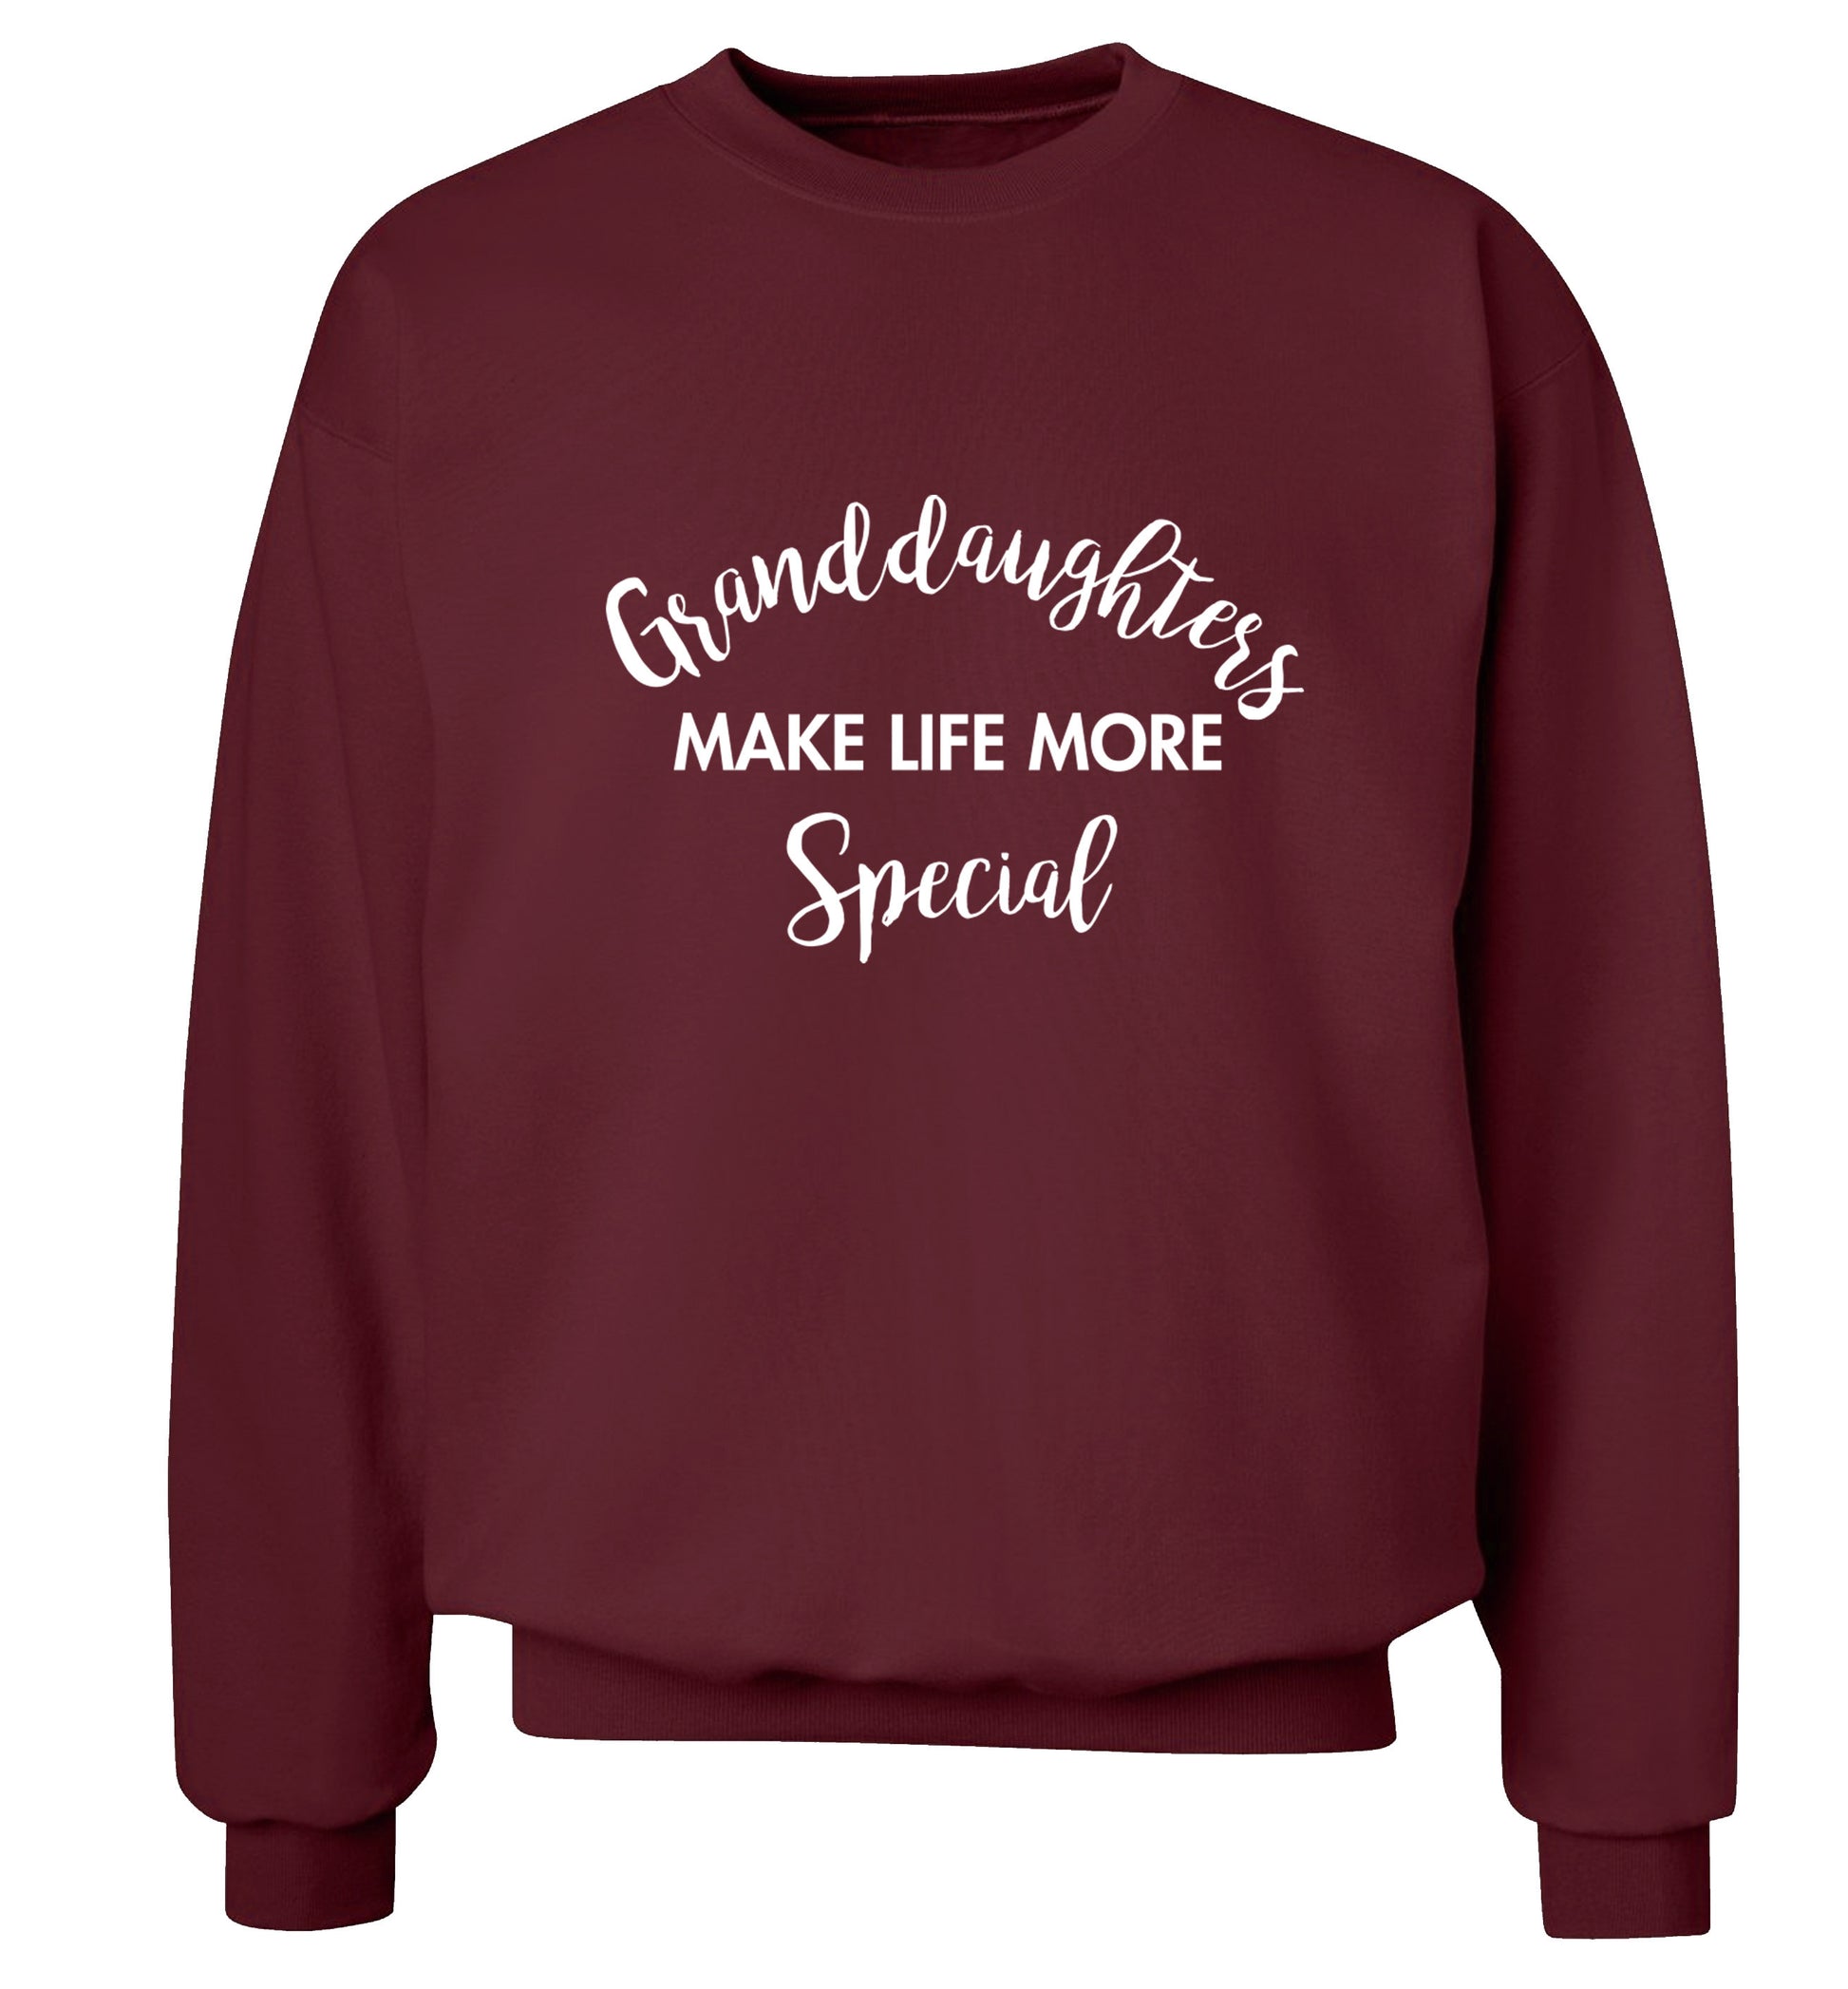 Granddaughters make life more special Adult's unisex maroon Sweater 2XL